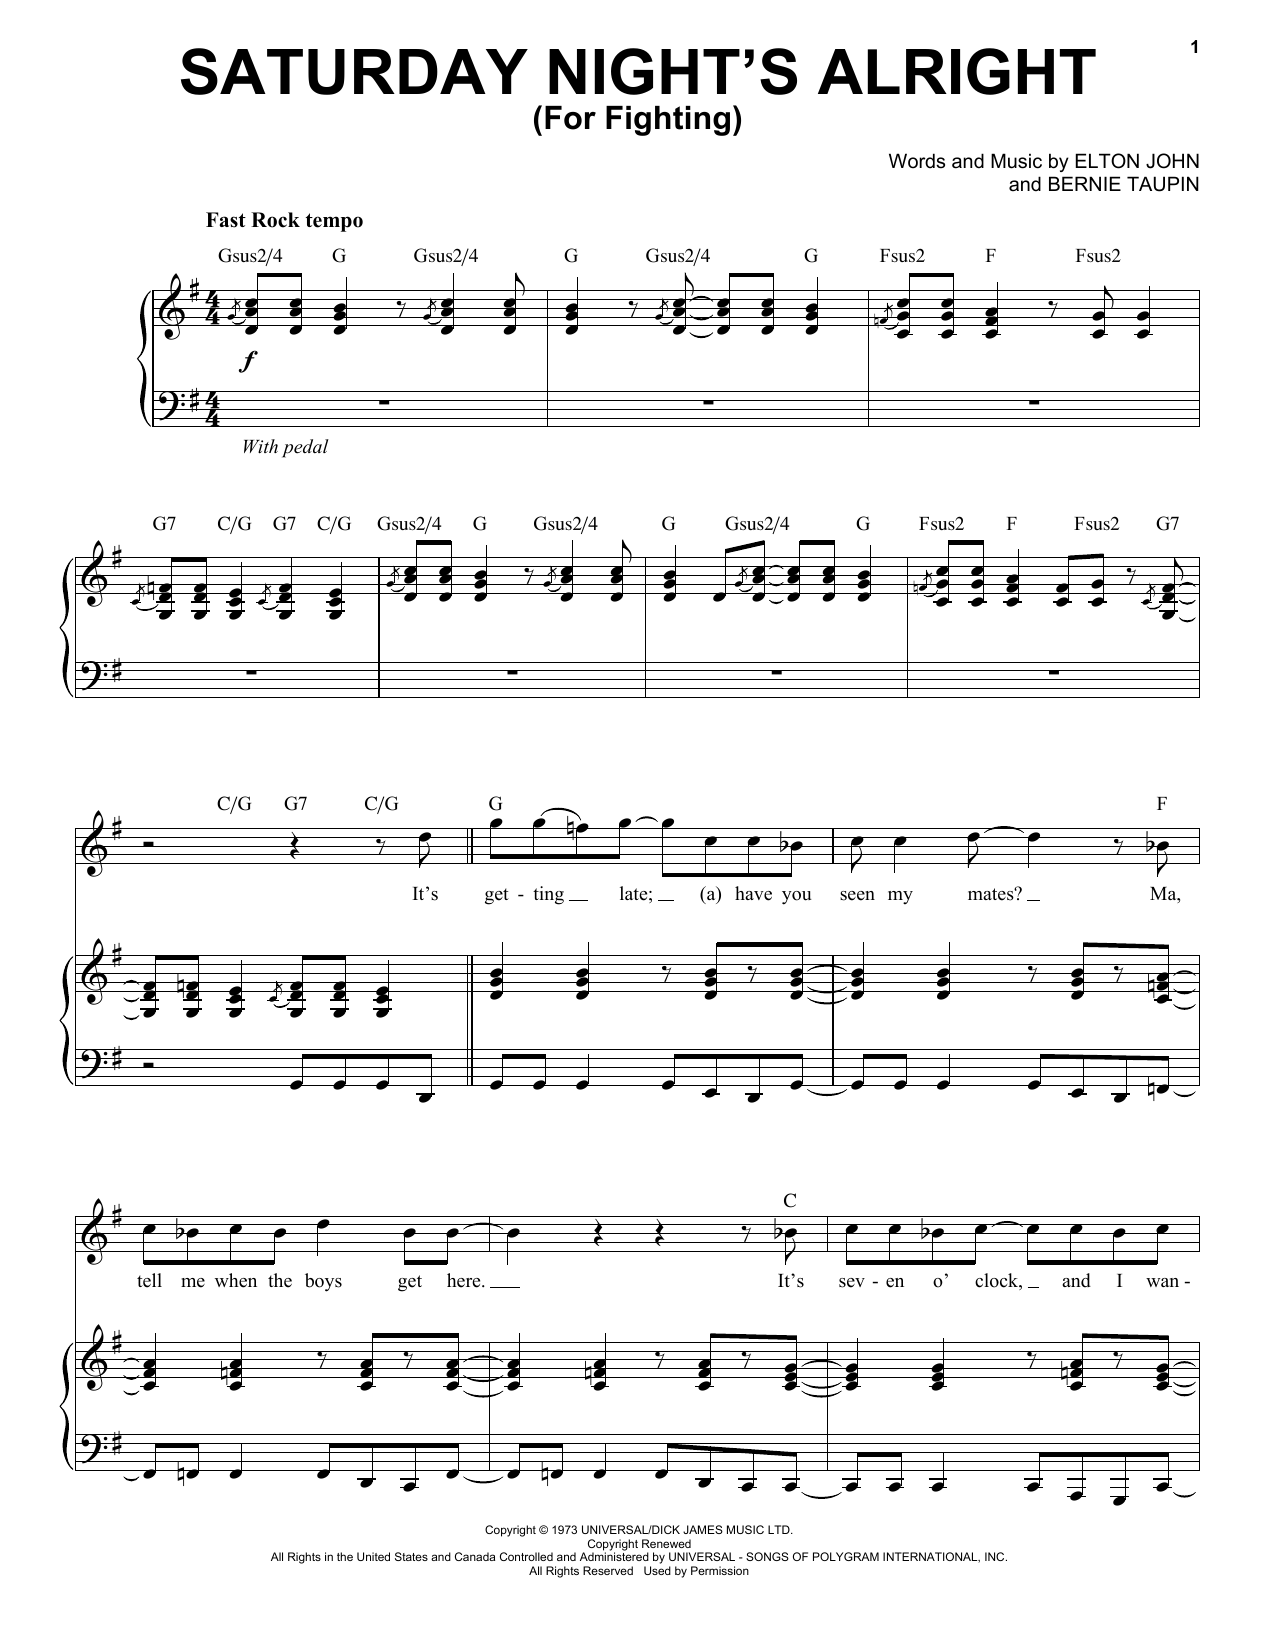 Elton John Saturday Night's Alright (For Fighting) sheet music notes and chords. Download Printable PDF.